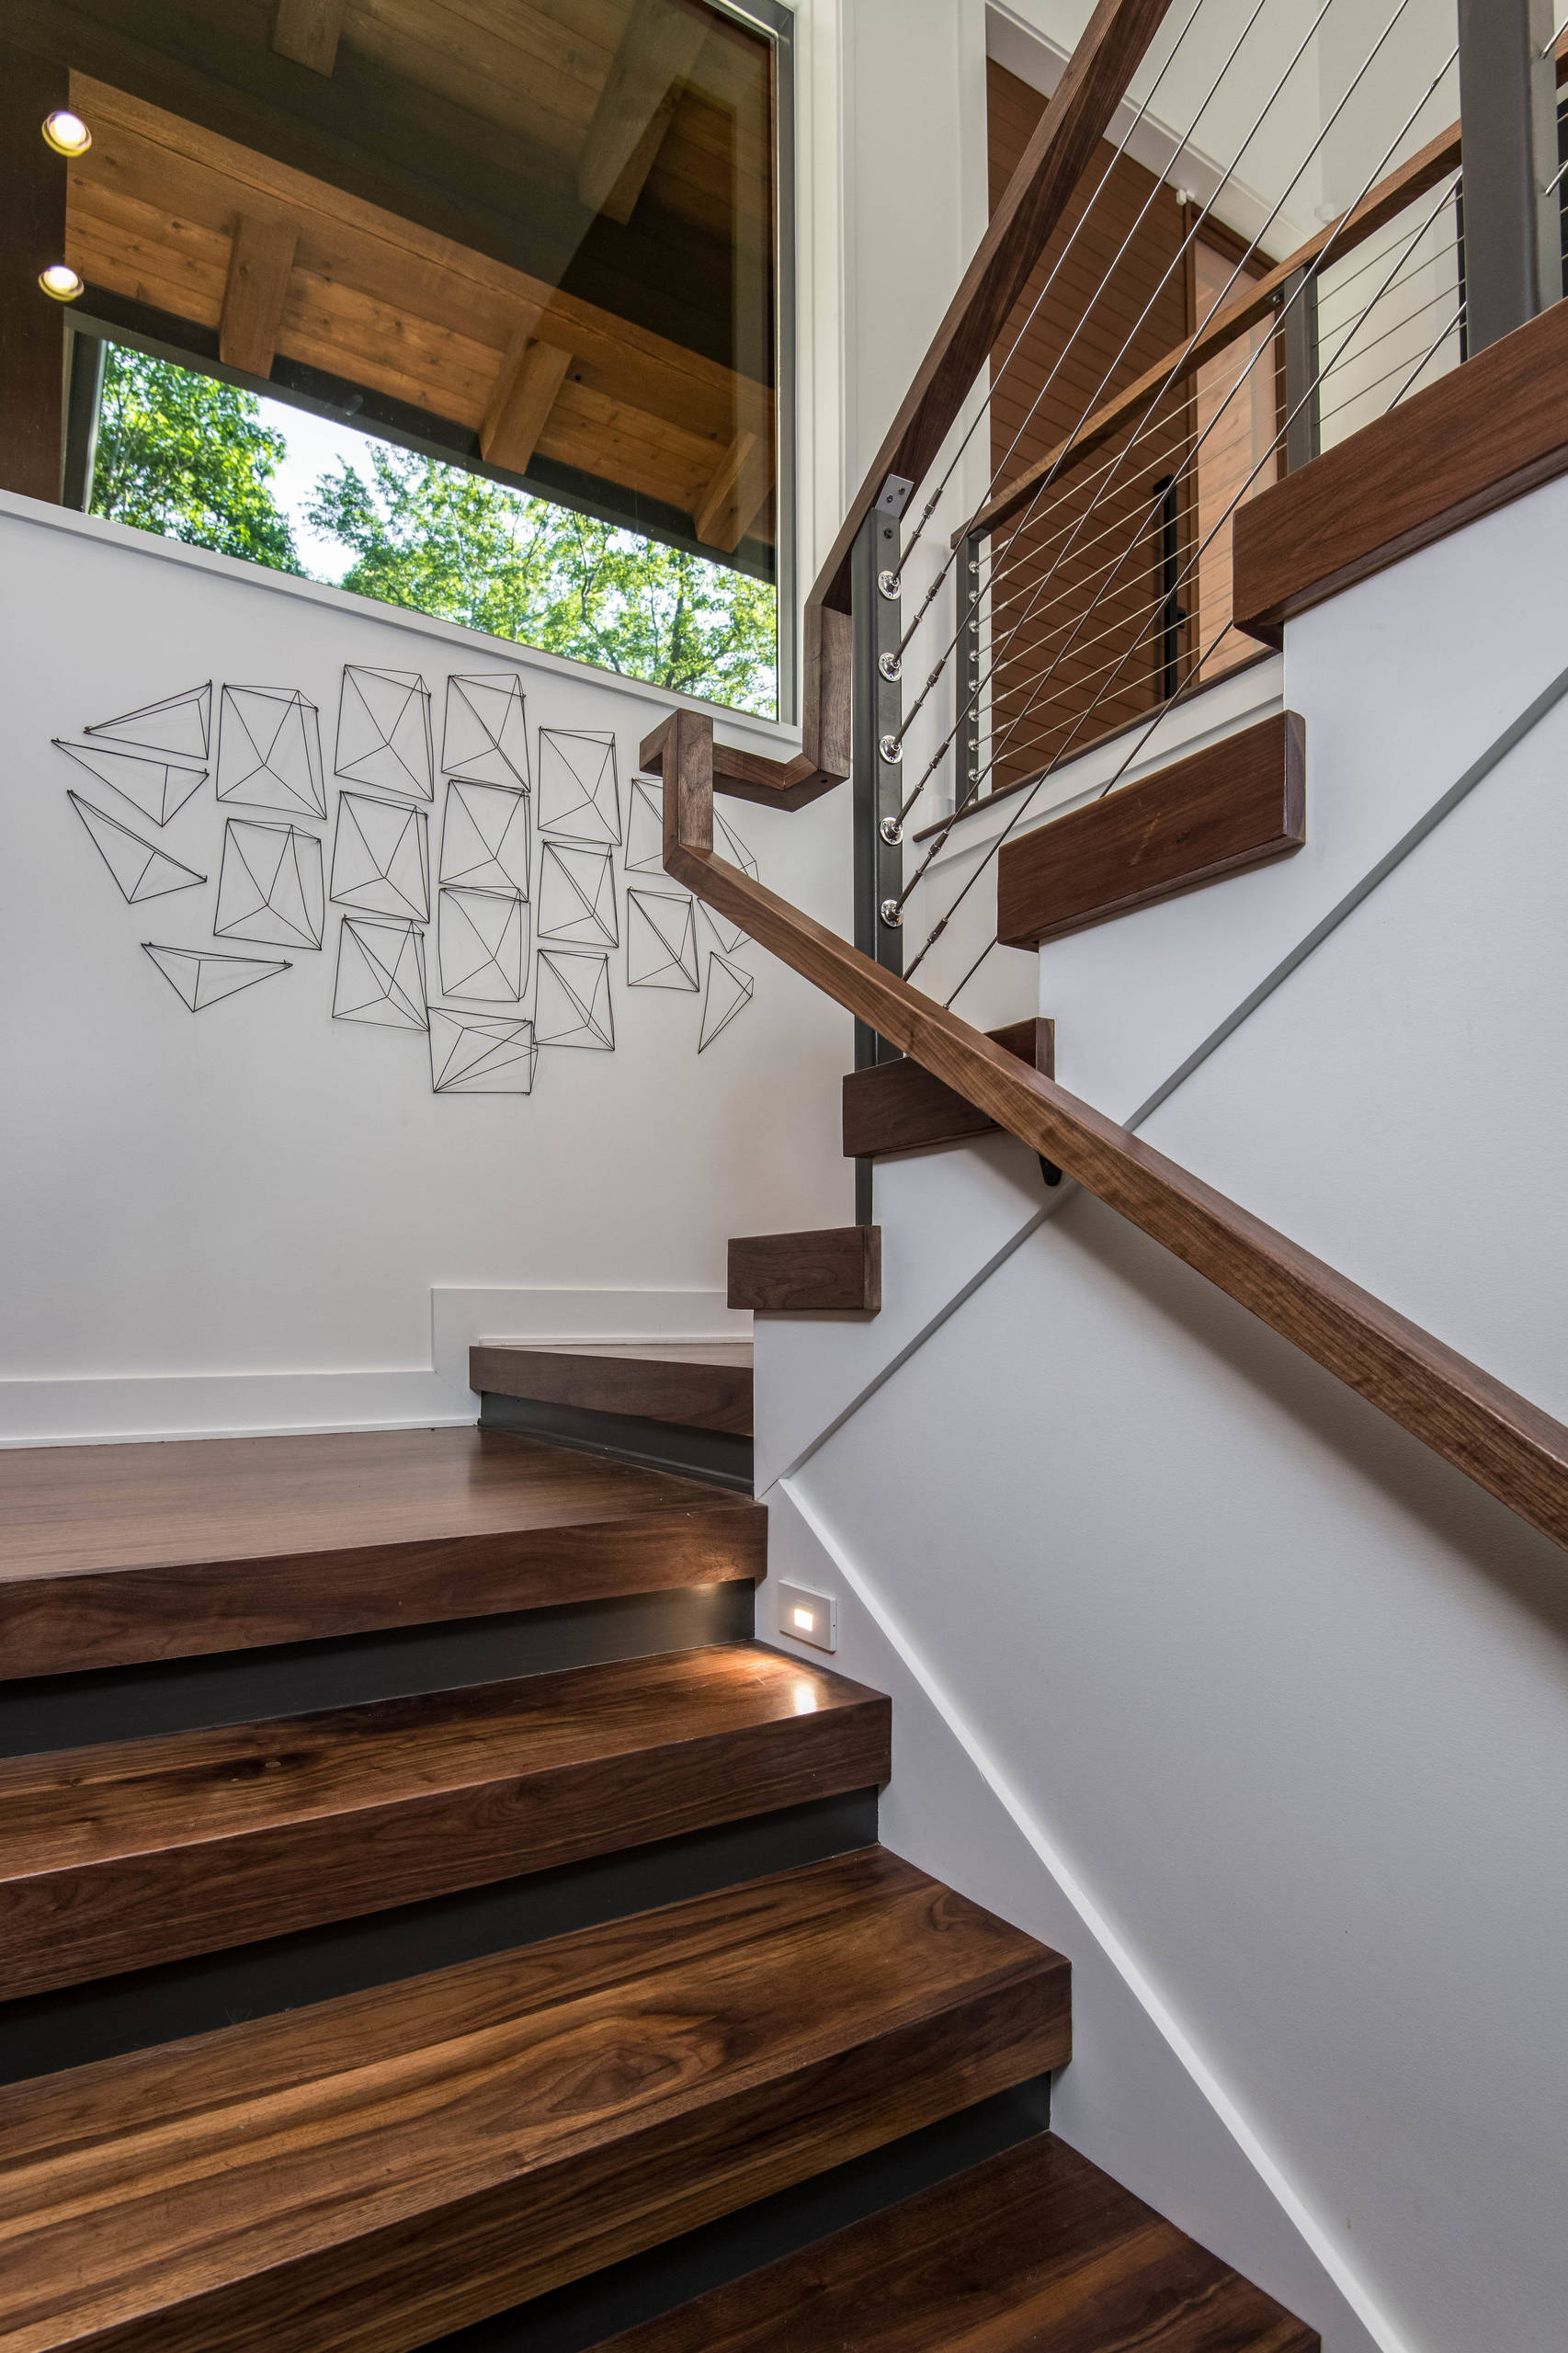 75 Modern Staircase Ideas You'll Love - January, 2023 | Houzz